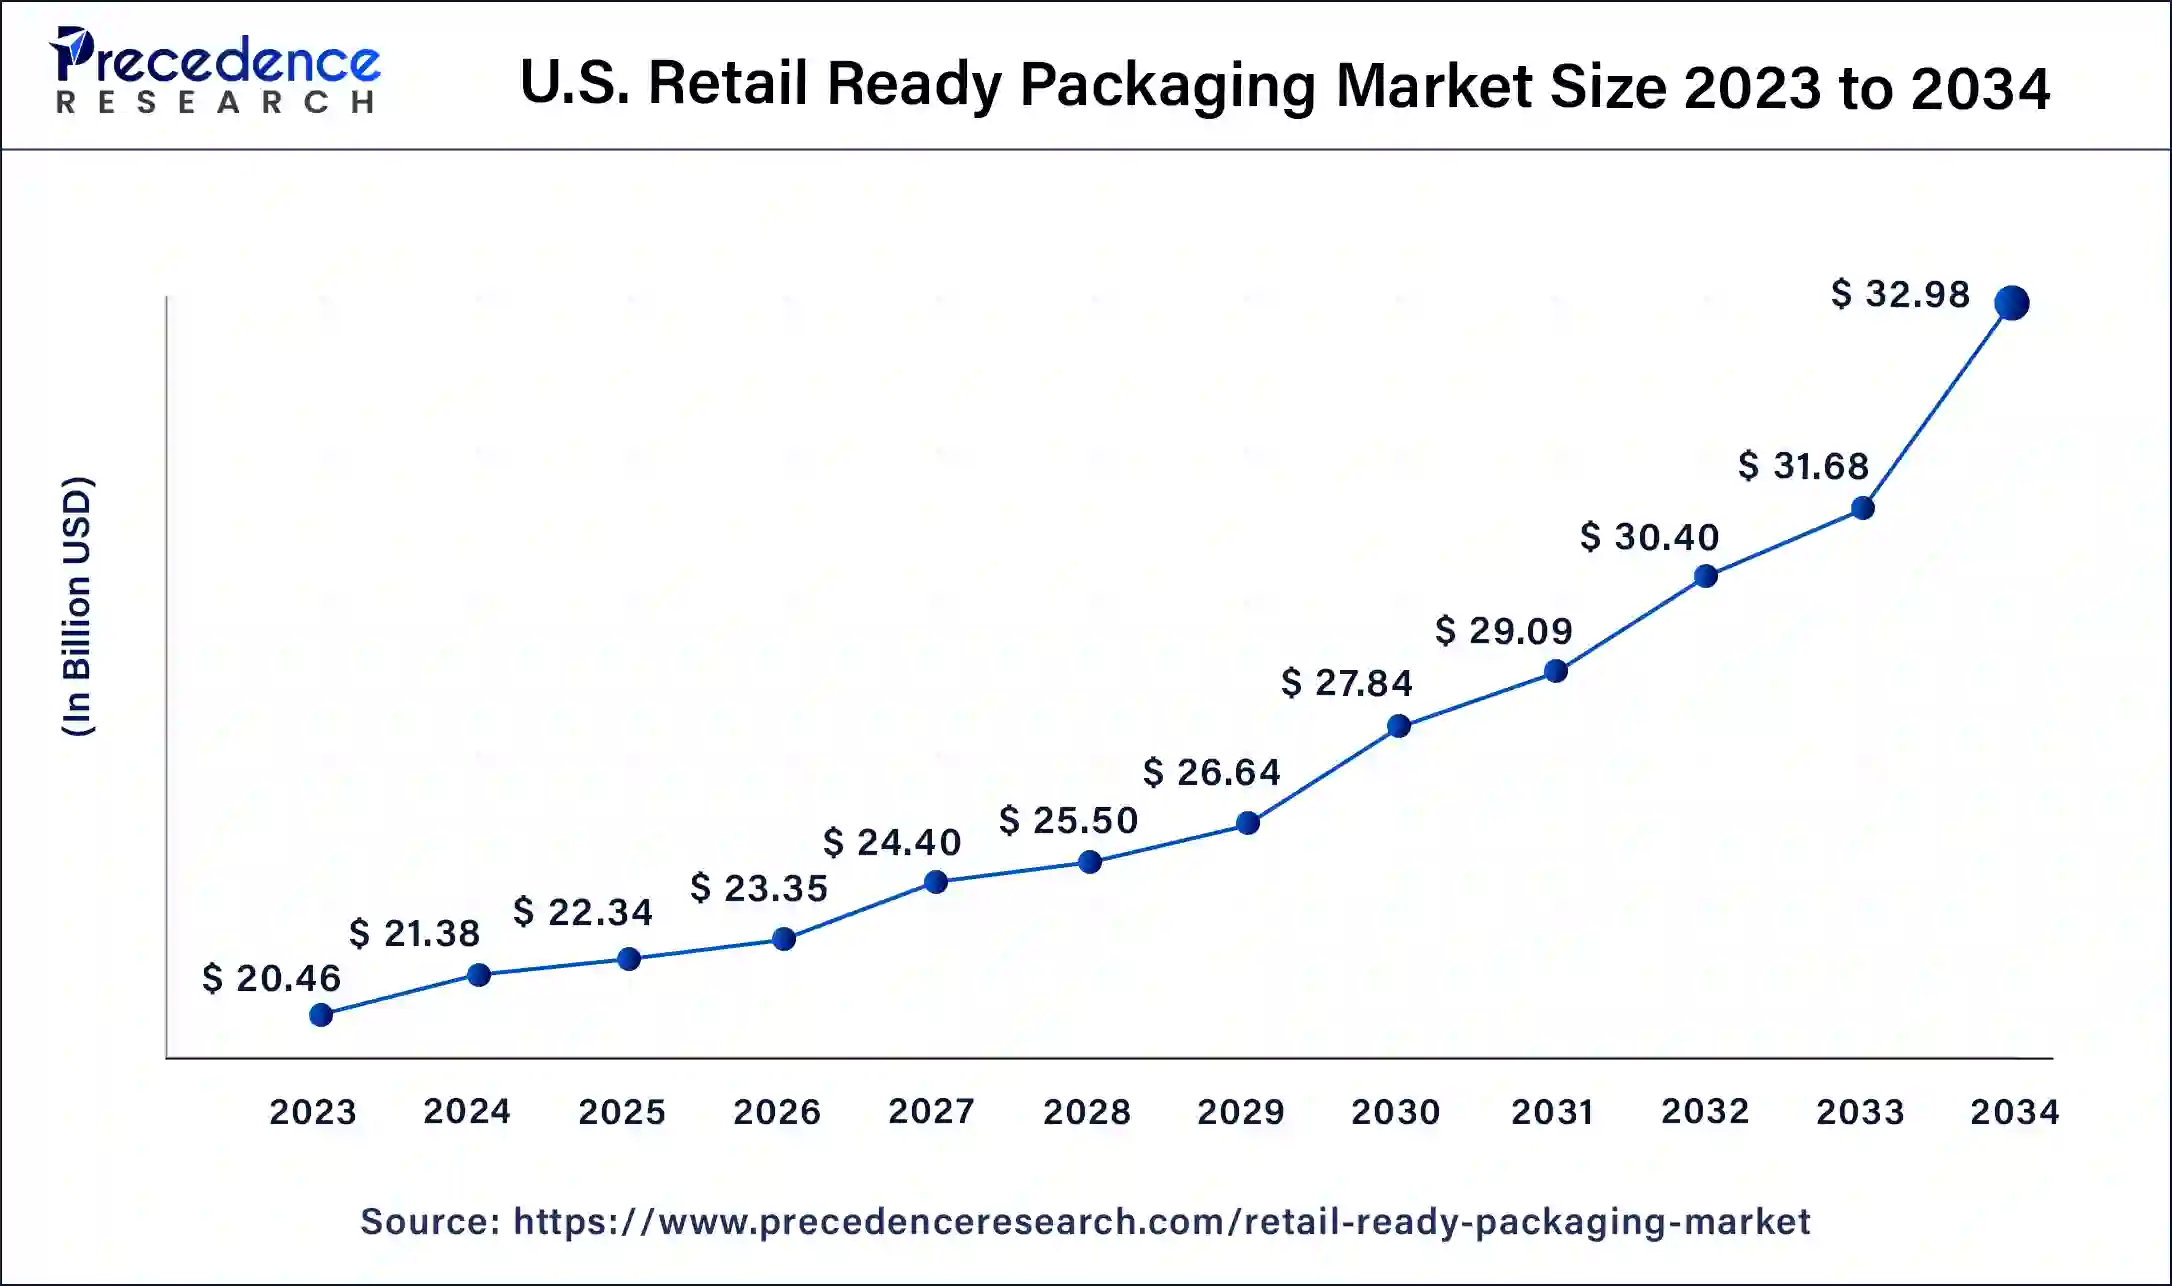 U.S. Retail Ready Packaging Market Size 2024 to 2034